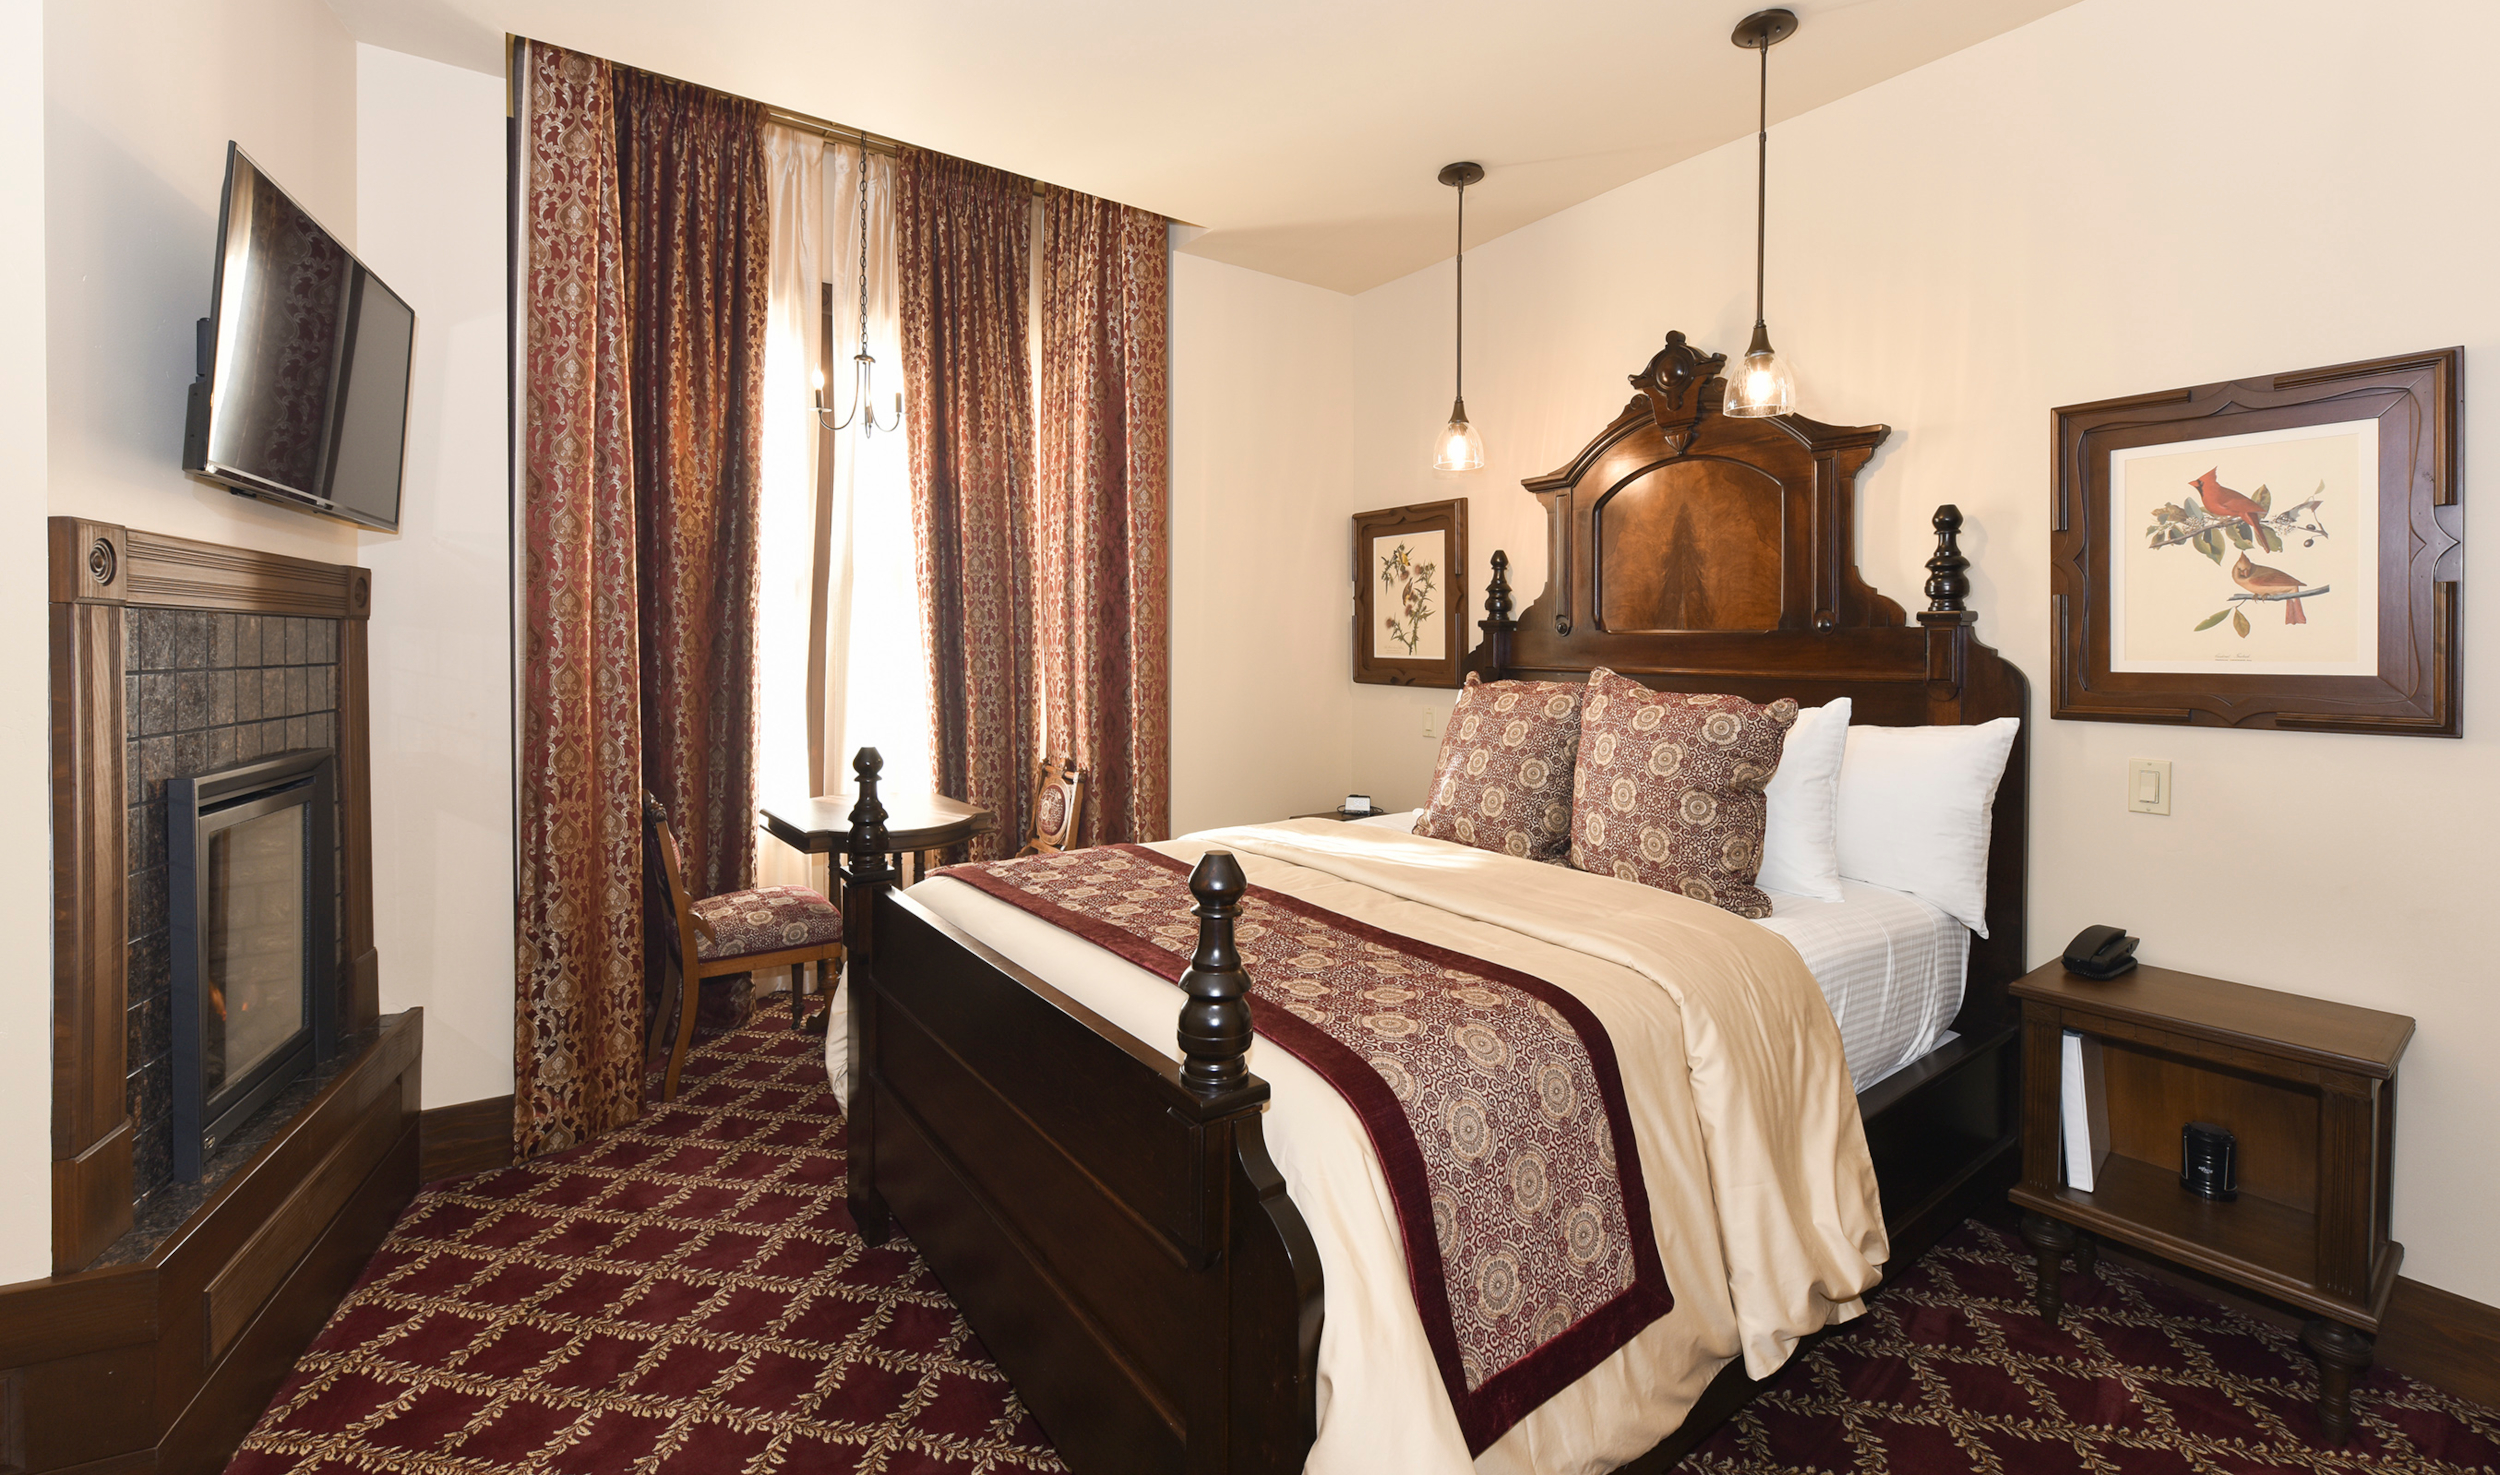 Room 11 Features Queen Bed Flanked by 2 Nightstands, and Antique Audubon Prints. Pendant Reading Lights Hang Above Bed.